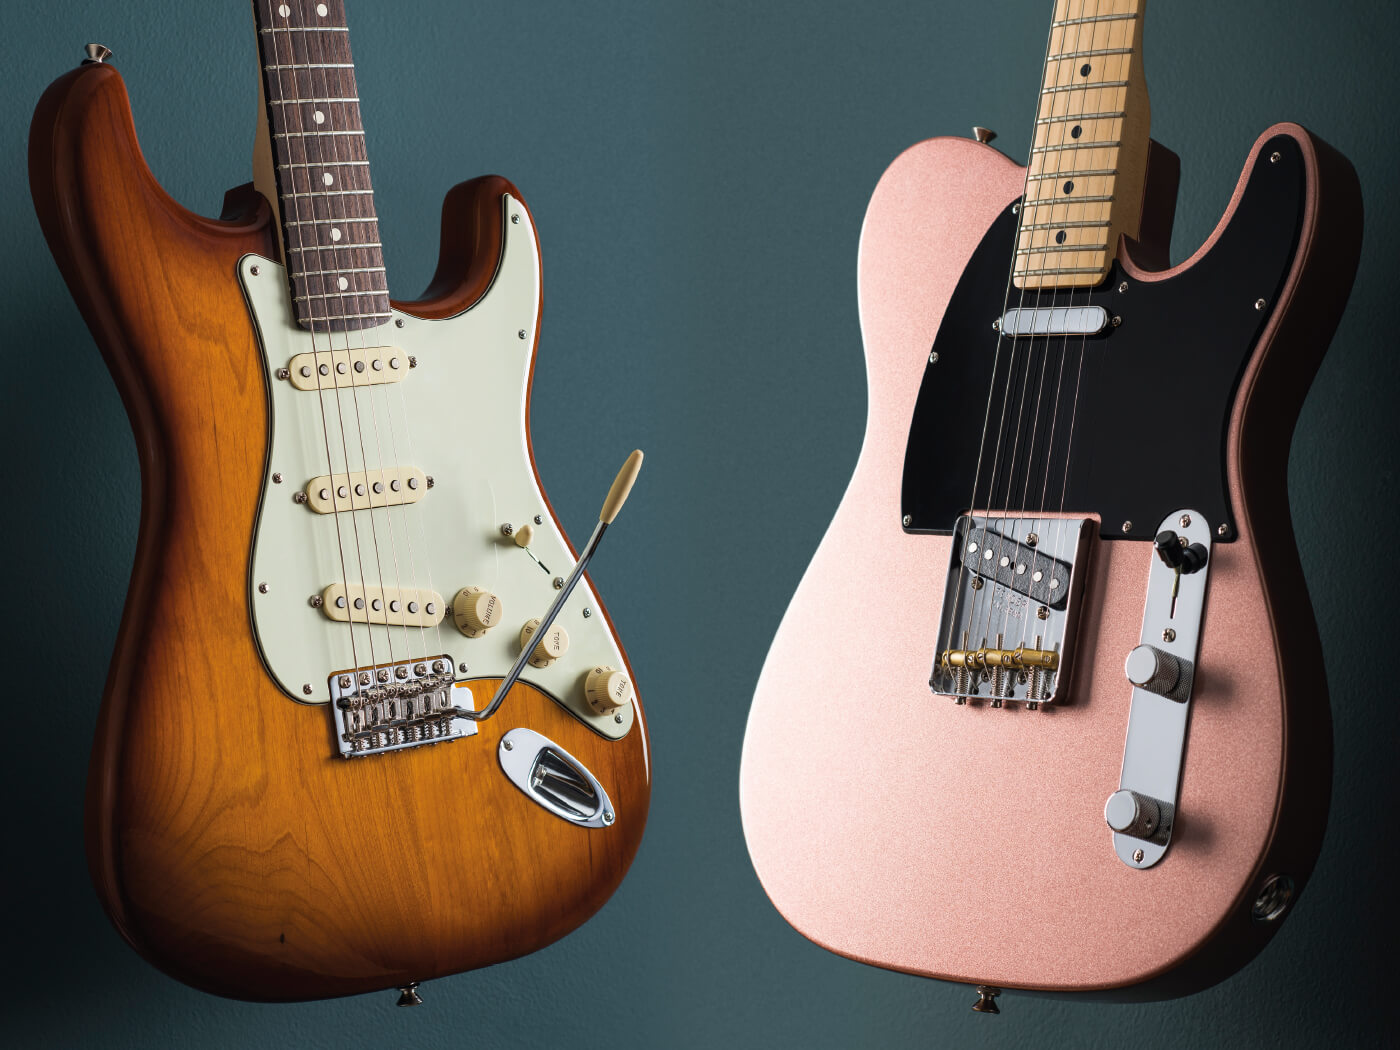 Fender American Perofrmer Stratocaster and Telecaster